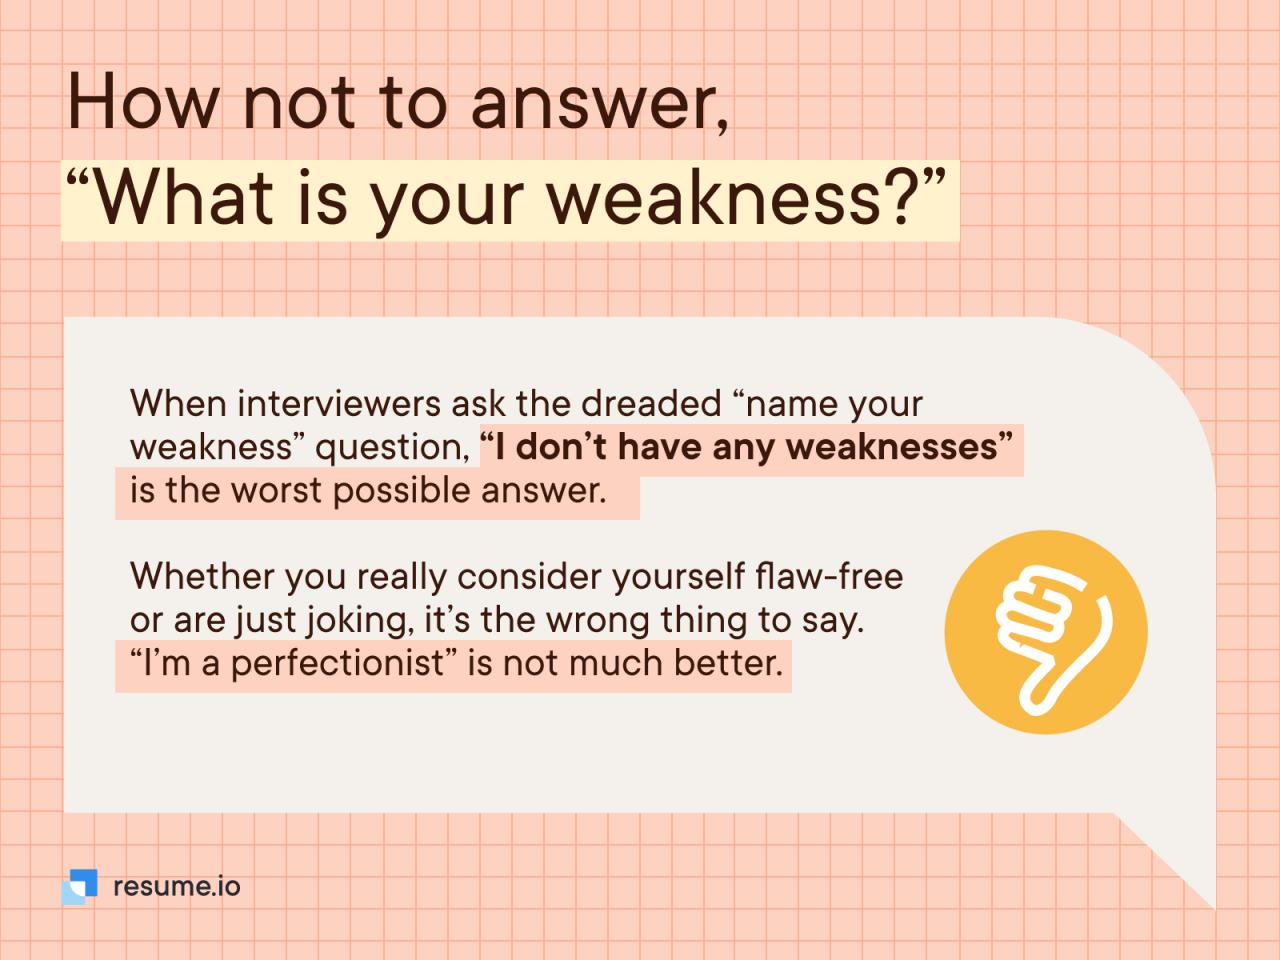 How do you answer the weakness question in an interview